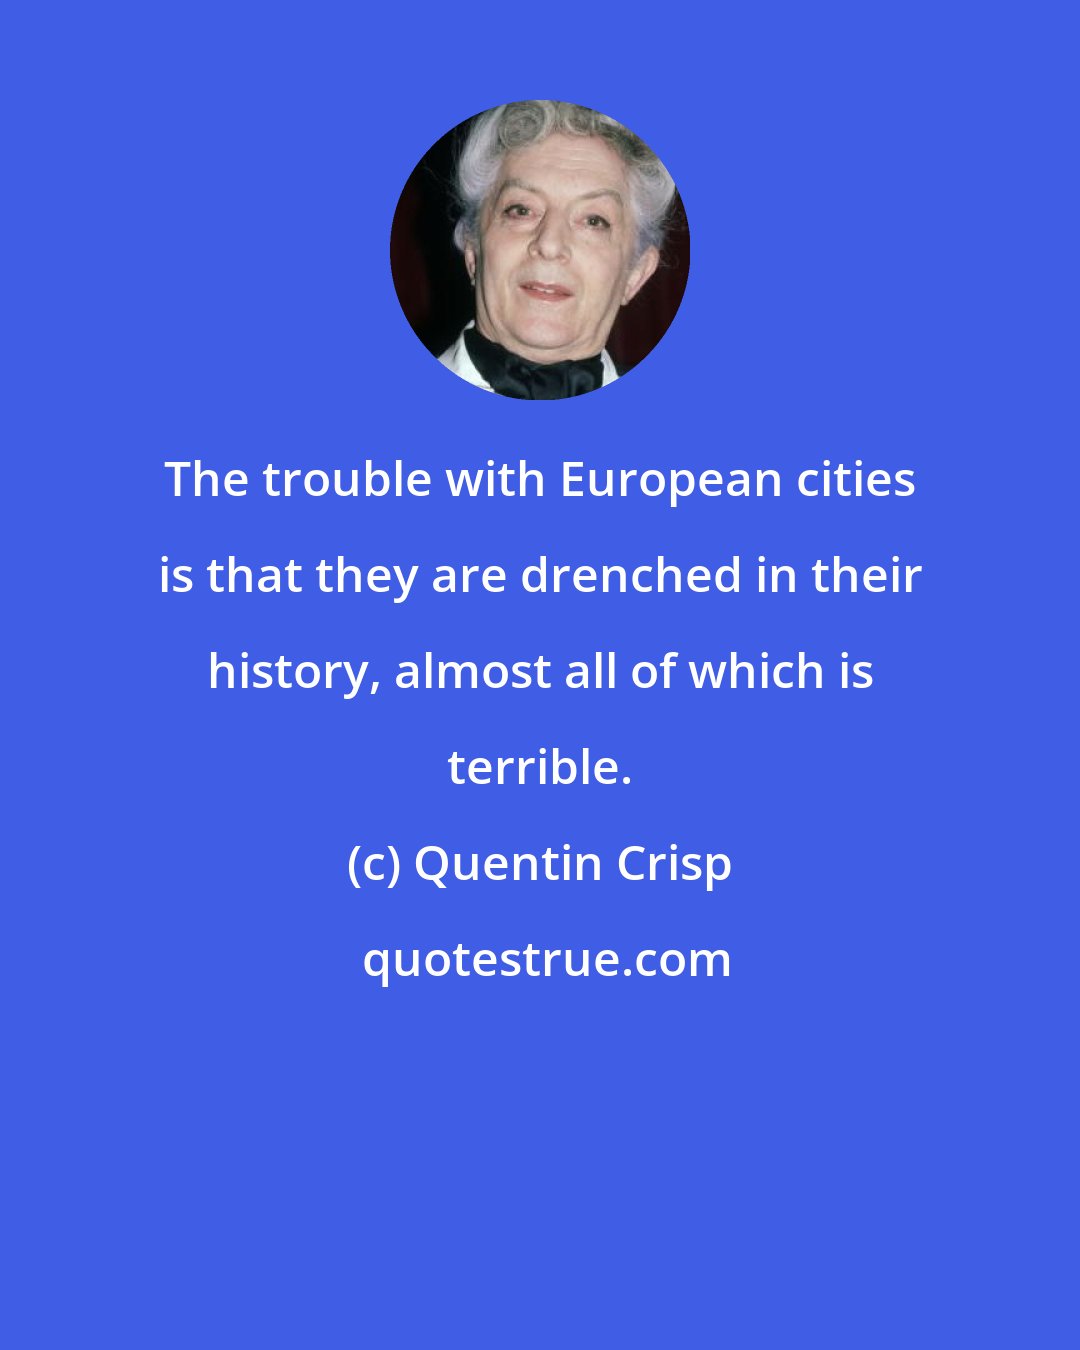 Quentin Crisp: The trouble with European cities is that they are drenched in their history, almost all of which is terrible.